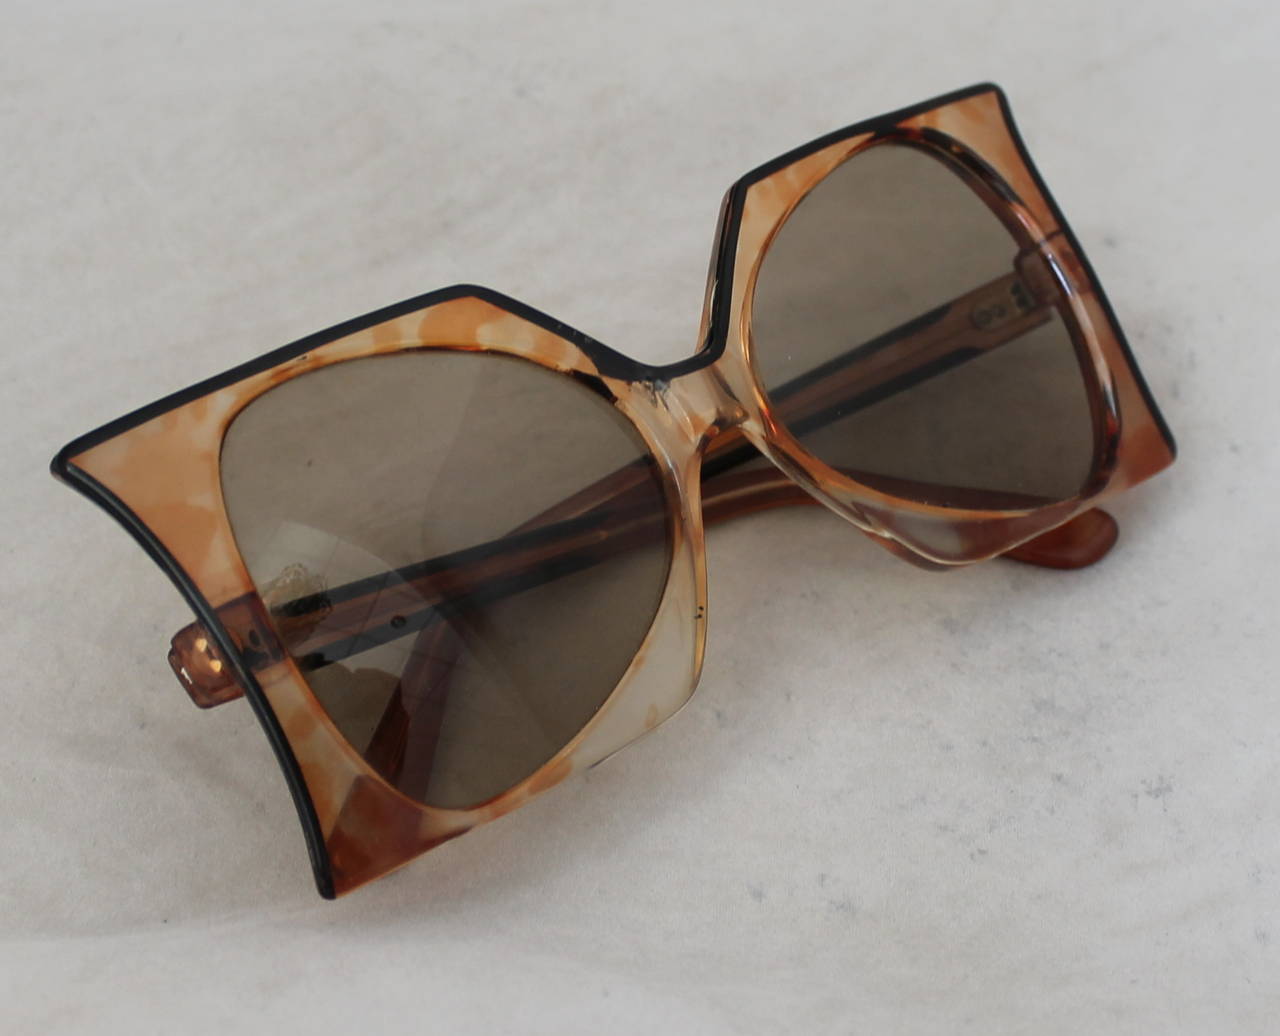 1960's Vintage Parisian Brown Square Lucite Sunglasses. These sunglasses are in very good vintage condition with minor wear consistent with age. There are very minor markings on the middle of the front of the frame as seen on images 2 and